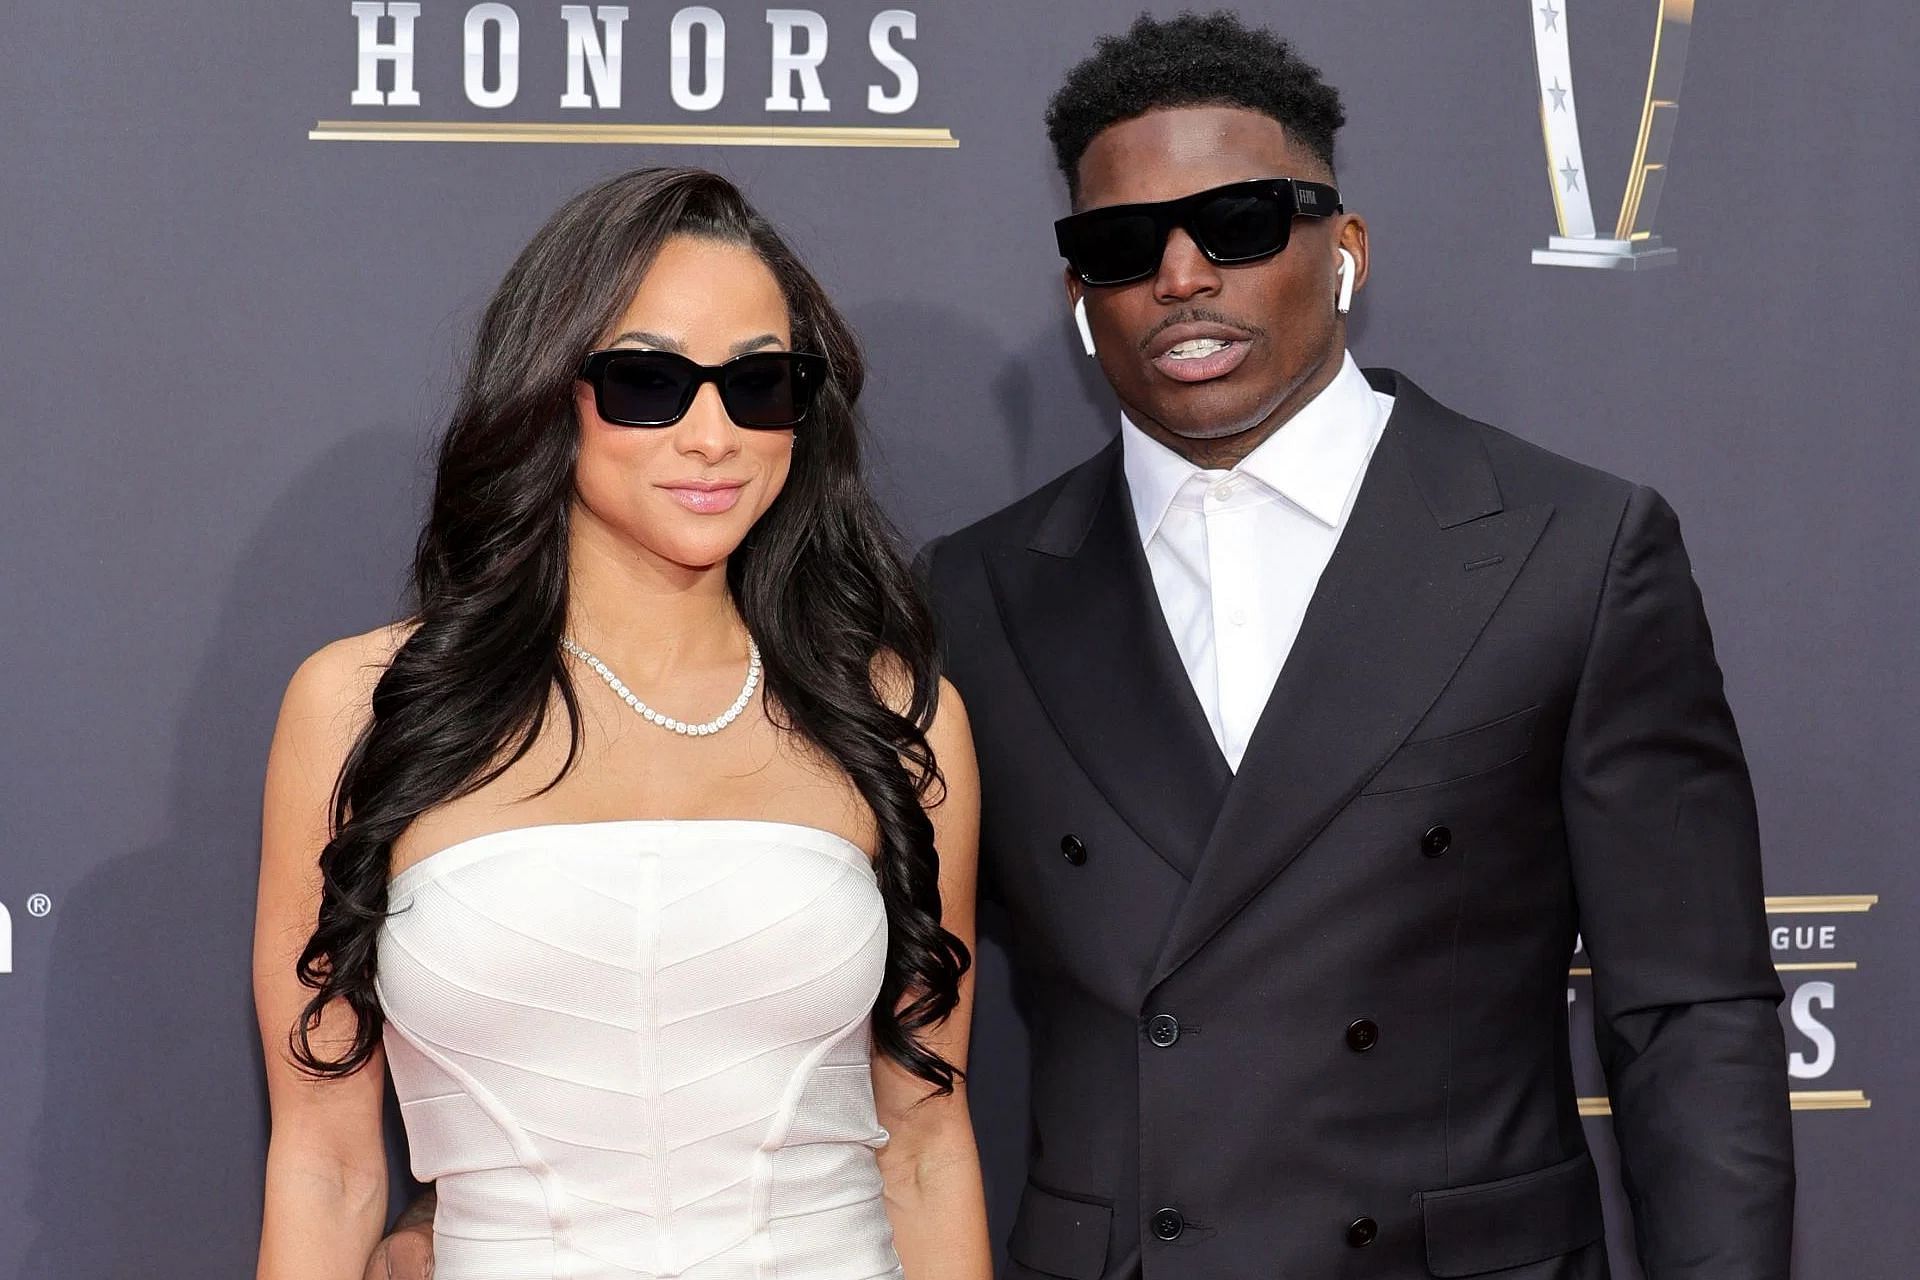 Tyreek Hill reveals how prenup disagreement with his wife spiraled into reports around potential divorce